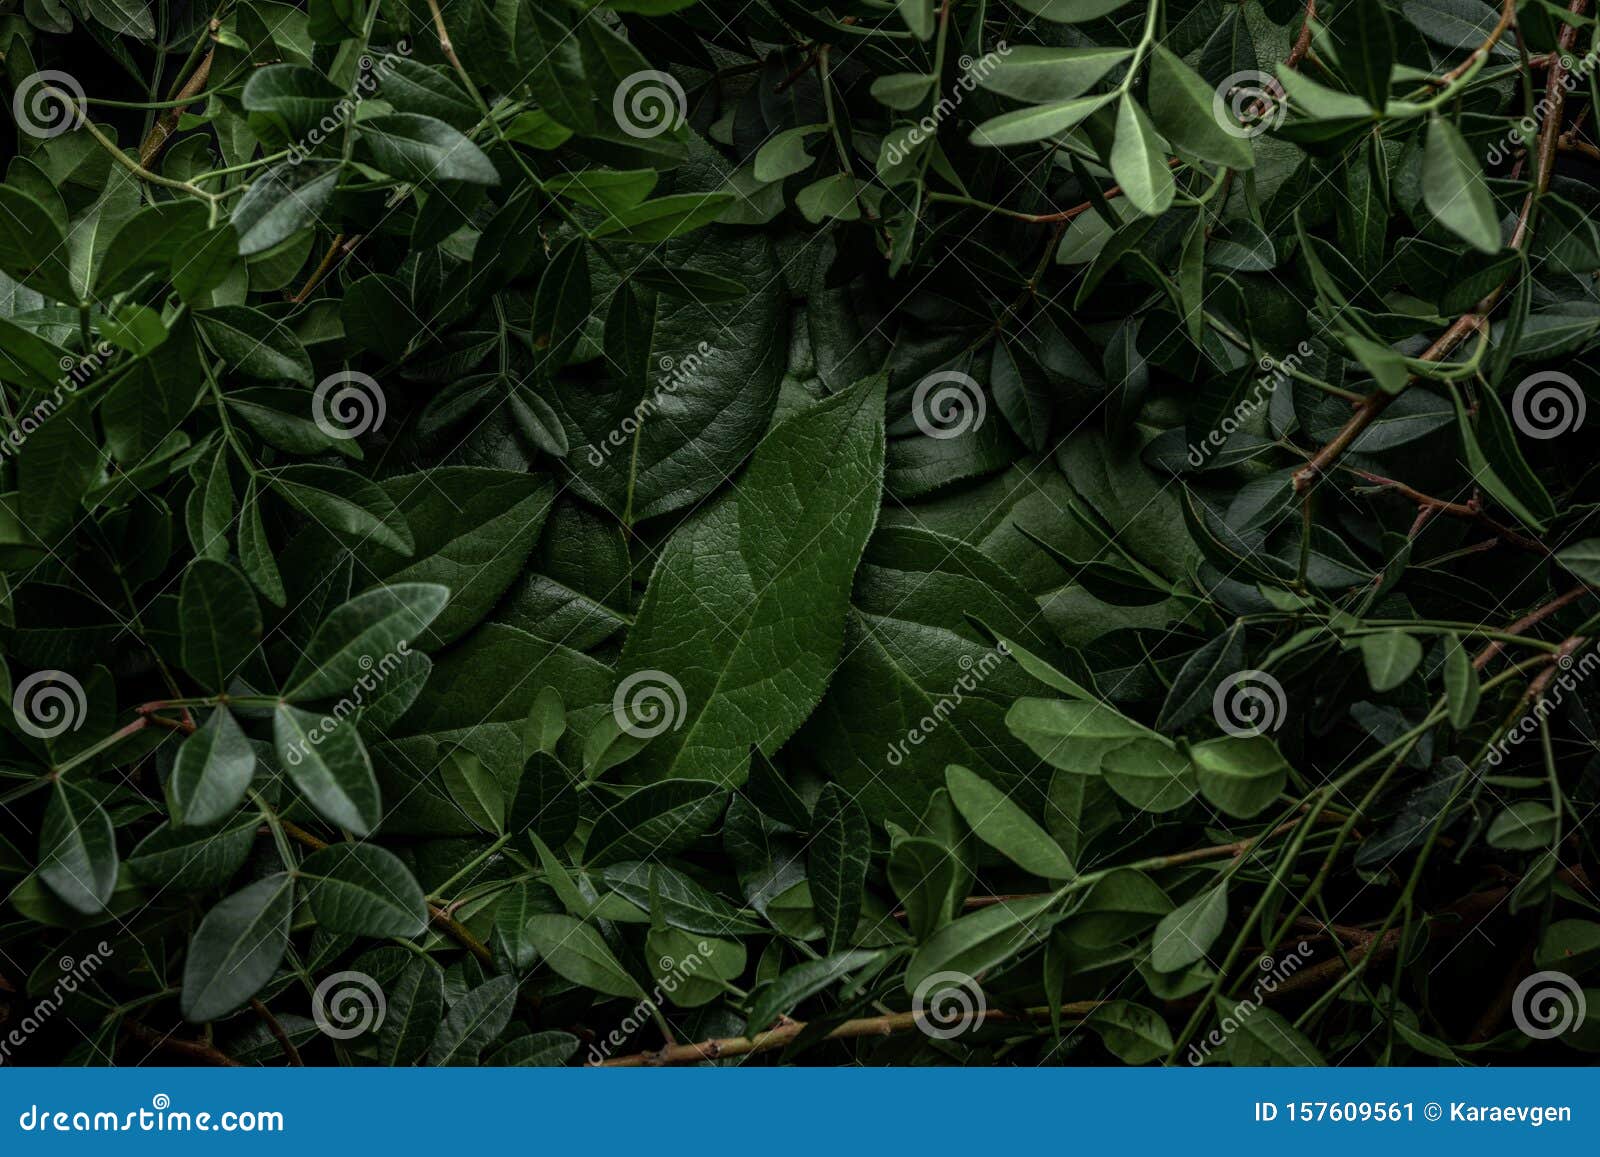 creative layout made of green leaves. flat lay. nature concept